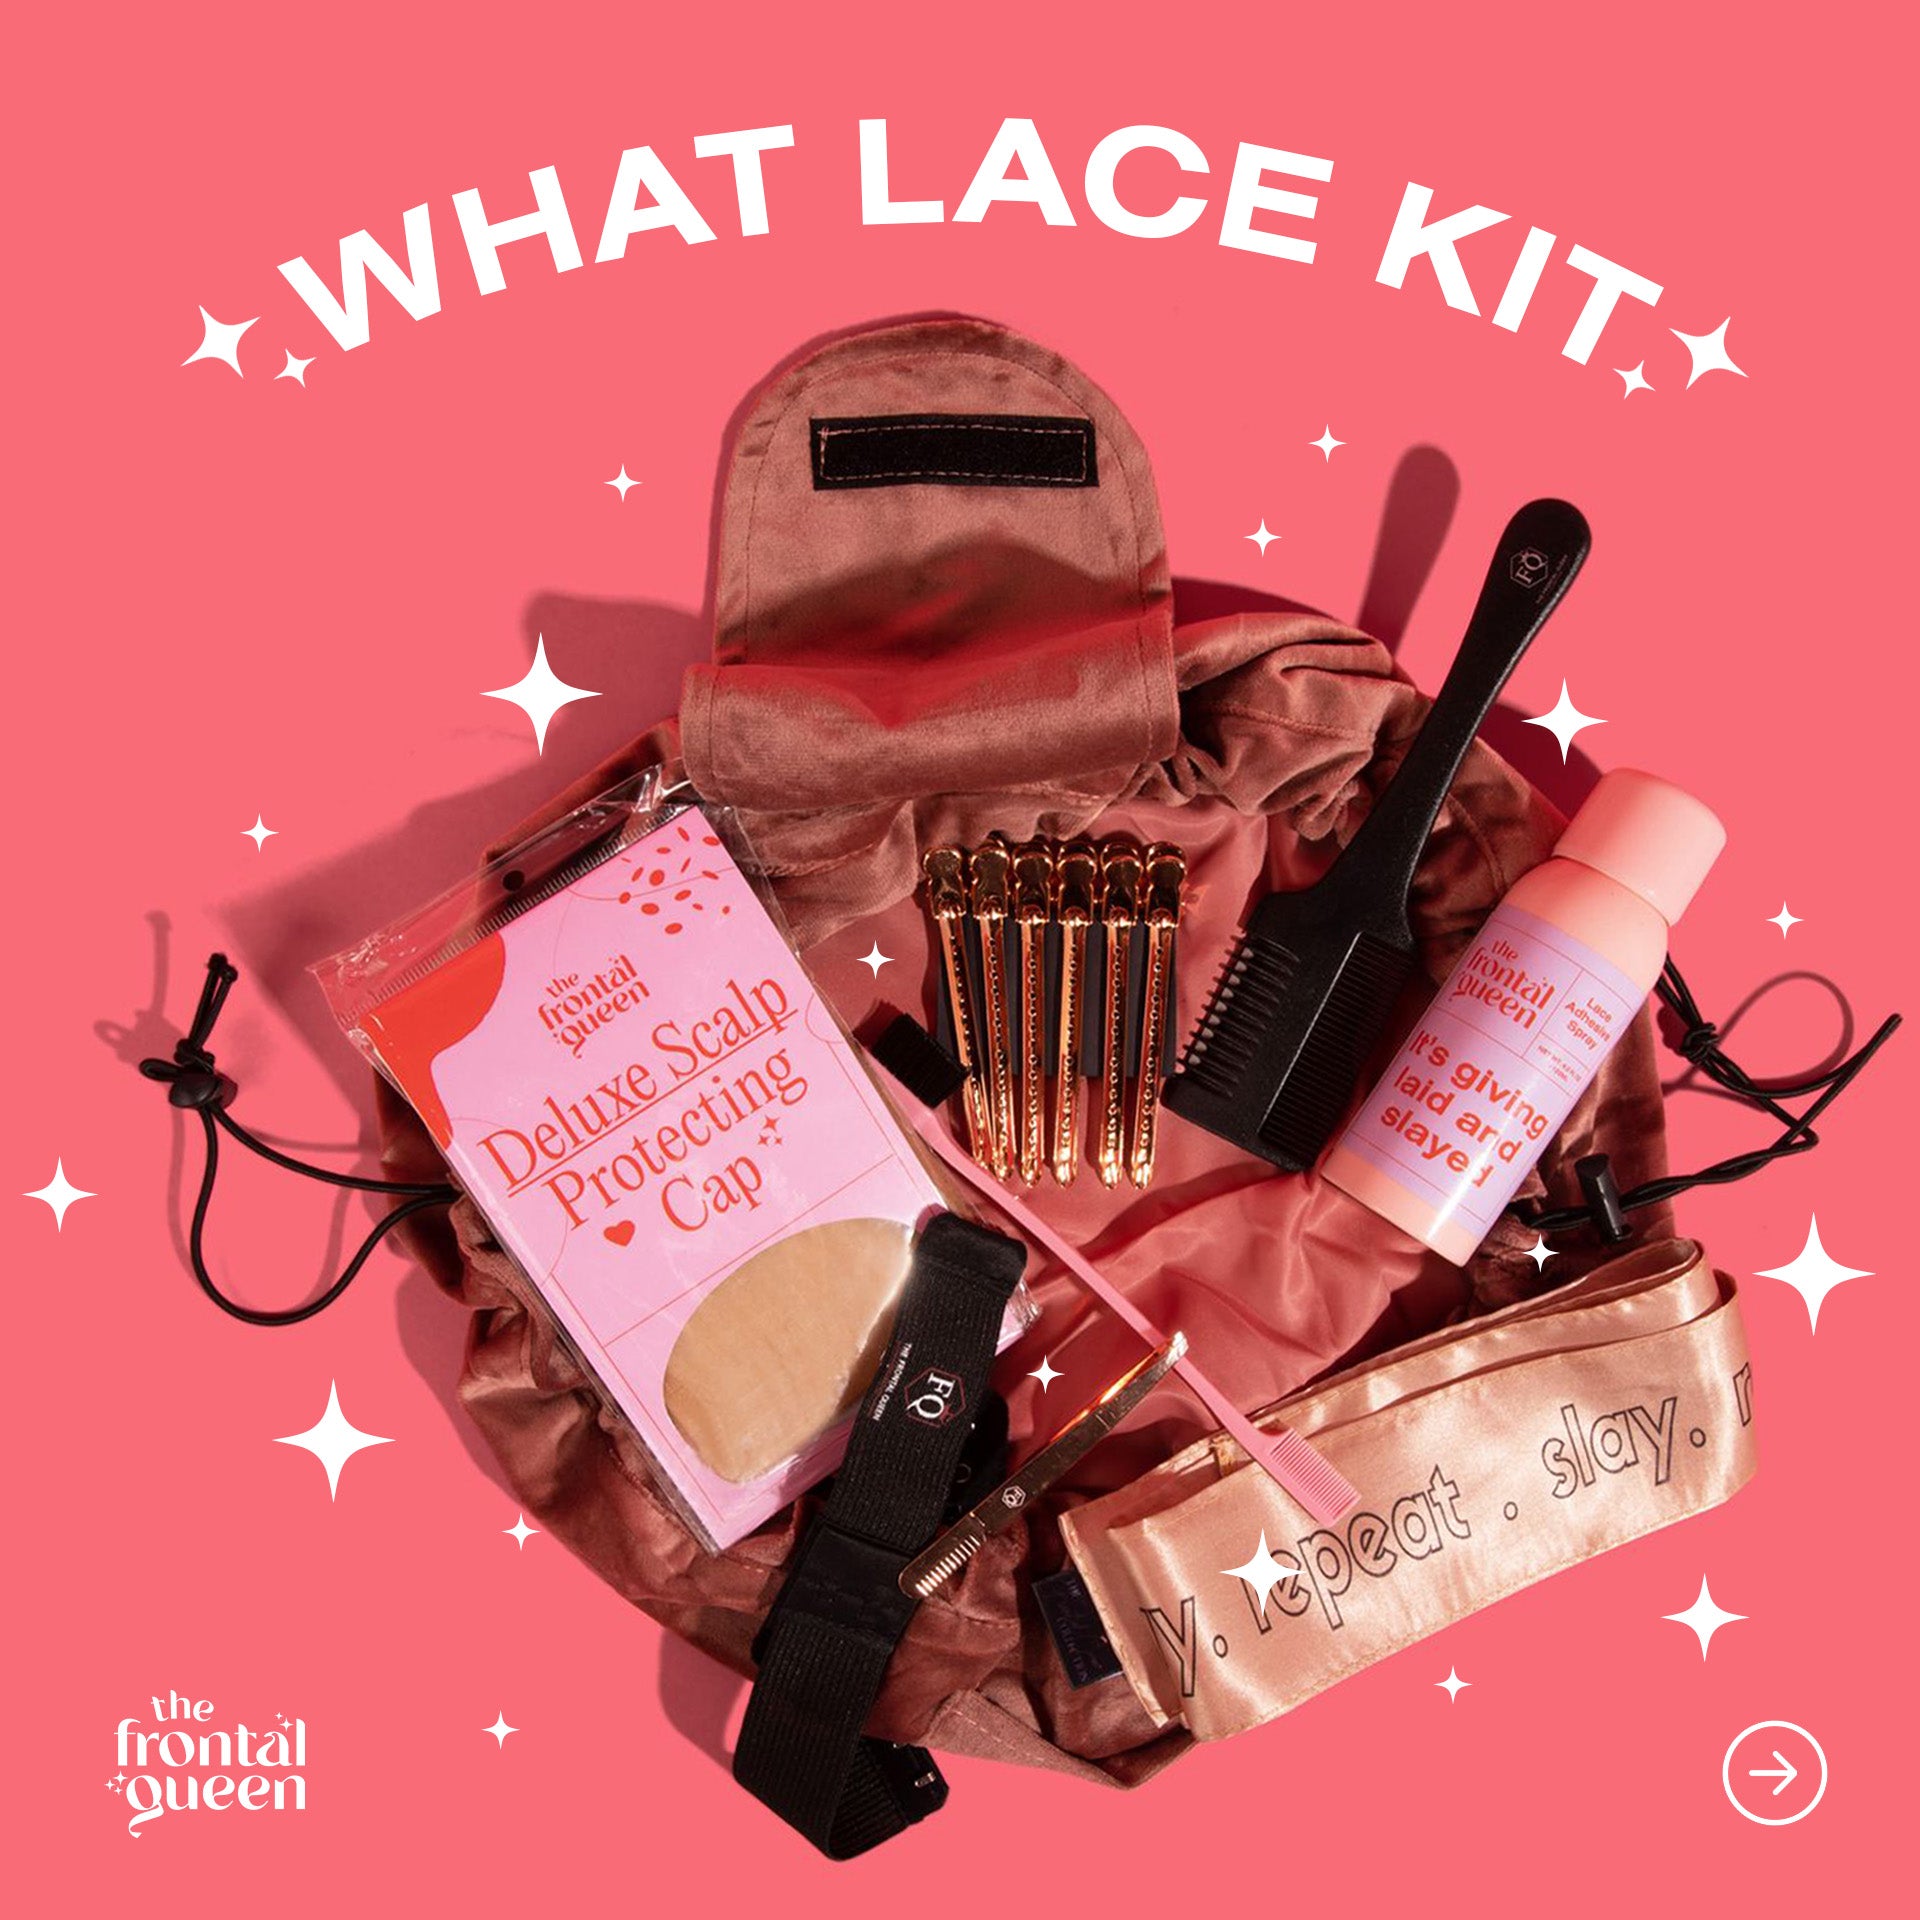 WHAT LACE KIT - Deluxe Install Kit - The Frontal Queen